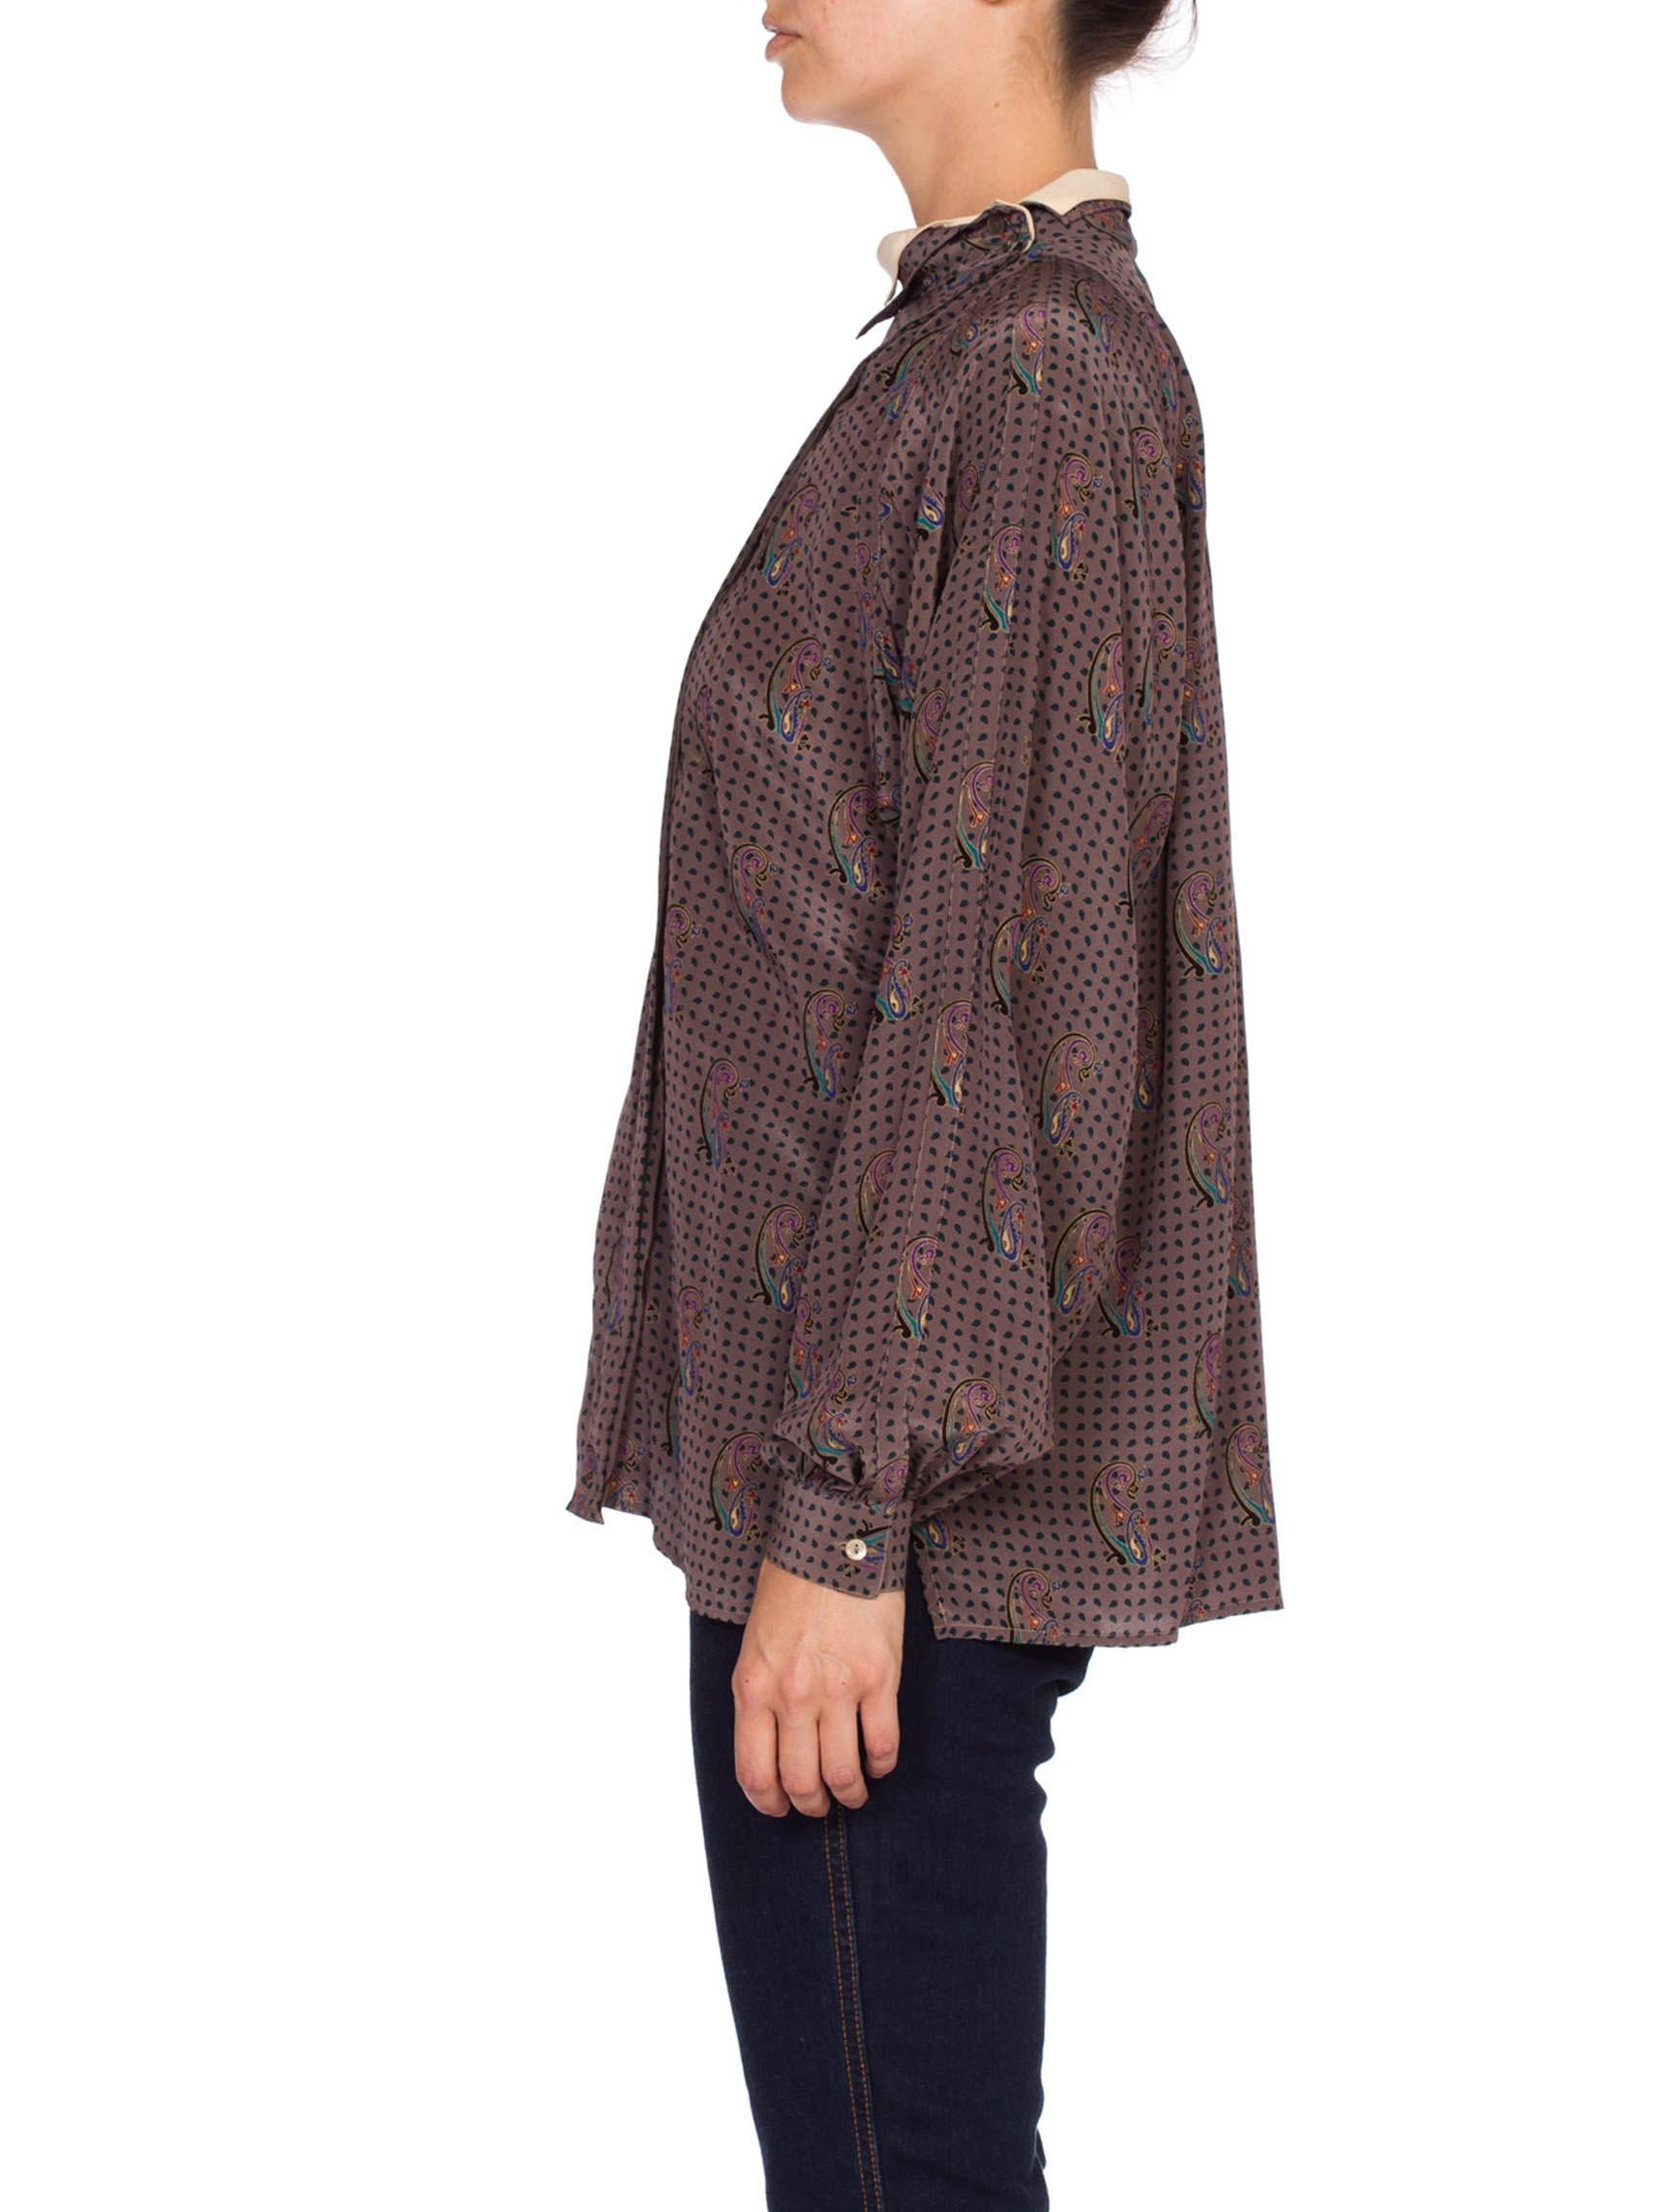 1970'S GUCCI Paisley Silk Blouse With Metallic Gold Print Top In Excellent Condition For Sale In New York, NY